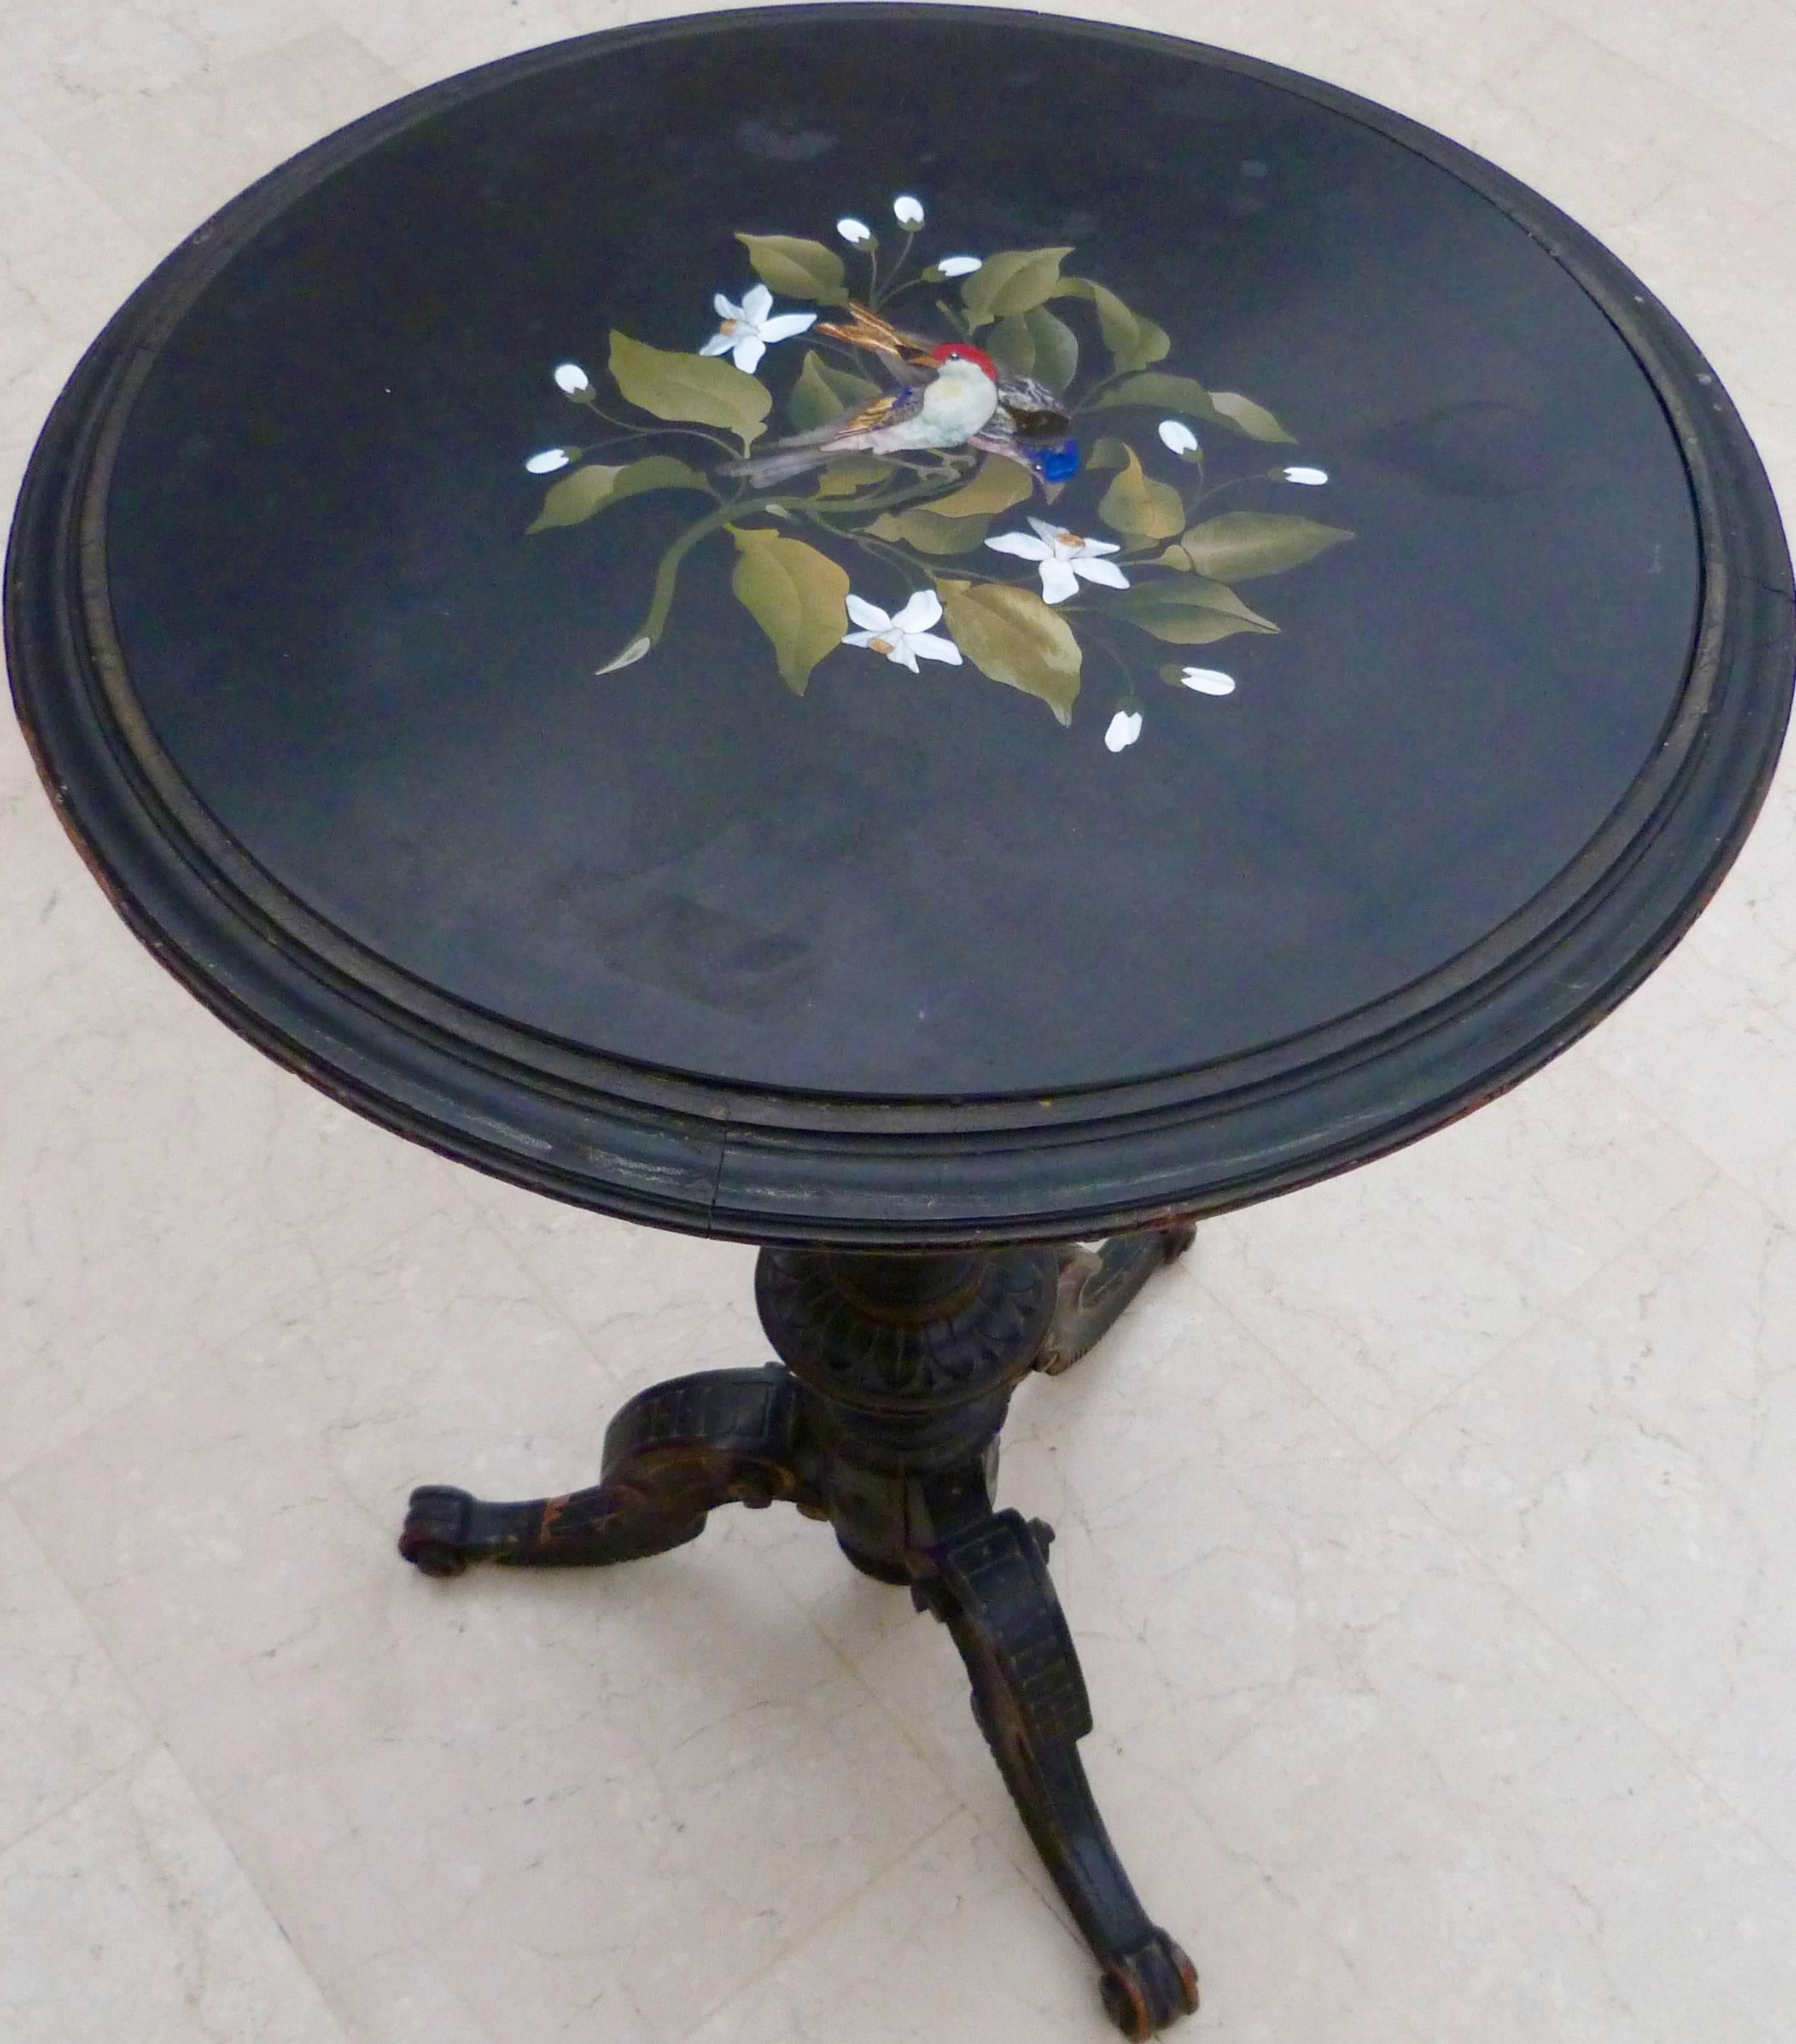 A 19th century Italian Pietra Dura round table.
Possibly Tuscany (Florence) Italy Pietra Dura inlaid slate inserted in a wooden ebonized carved base.